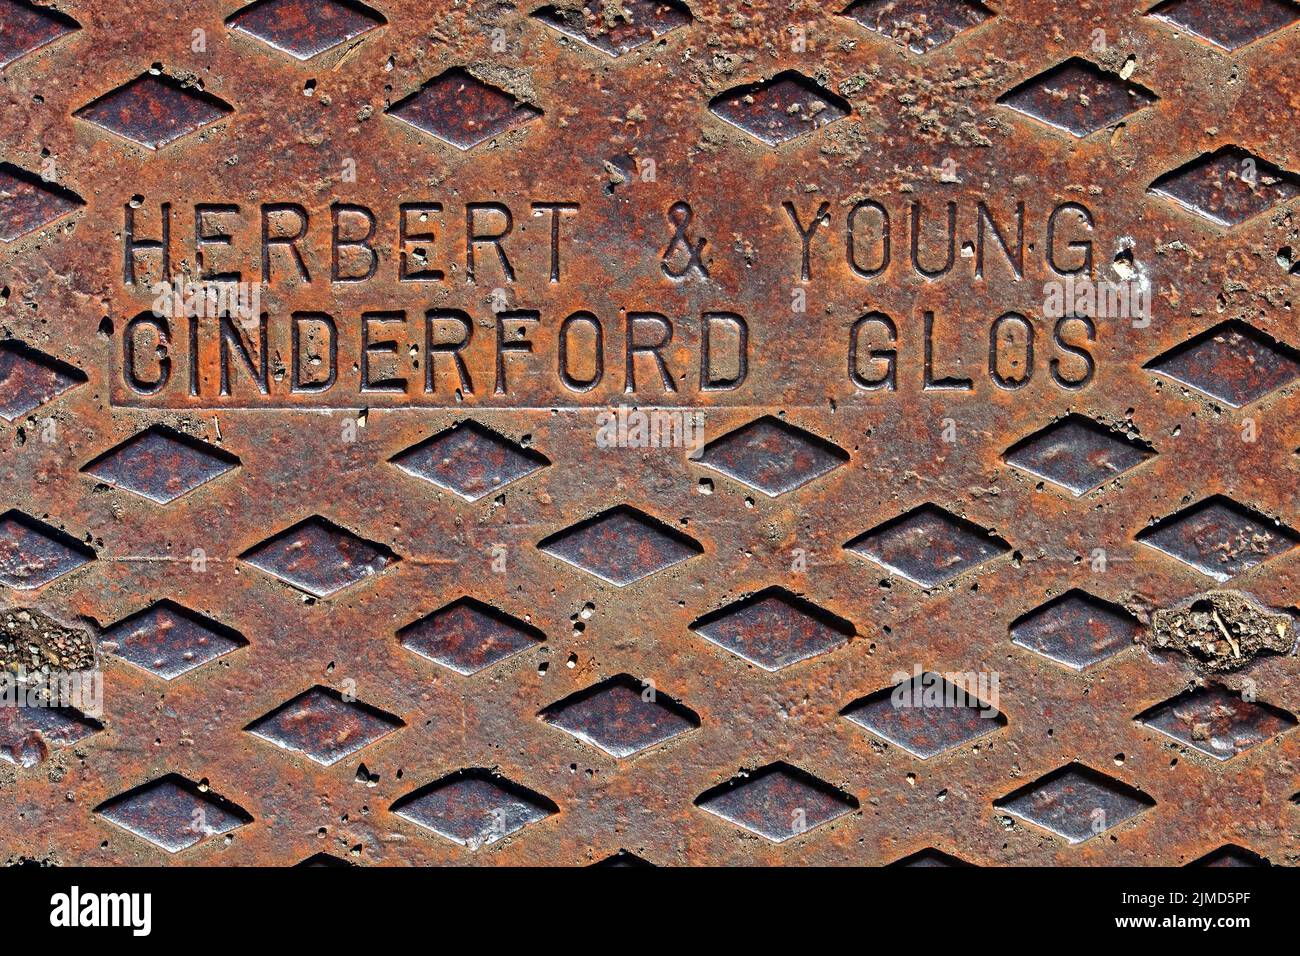 Herbert and Young Cinderford Glos grid, Stroud, Gloucestershire, England, UK, GL5 Stock Photo